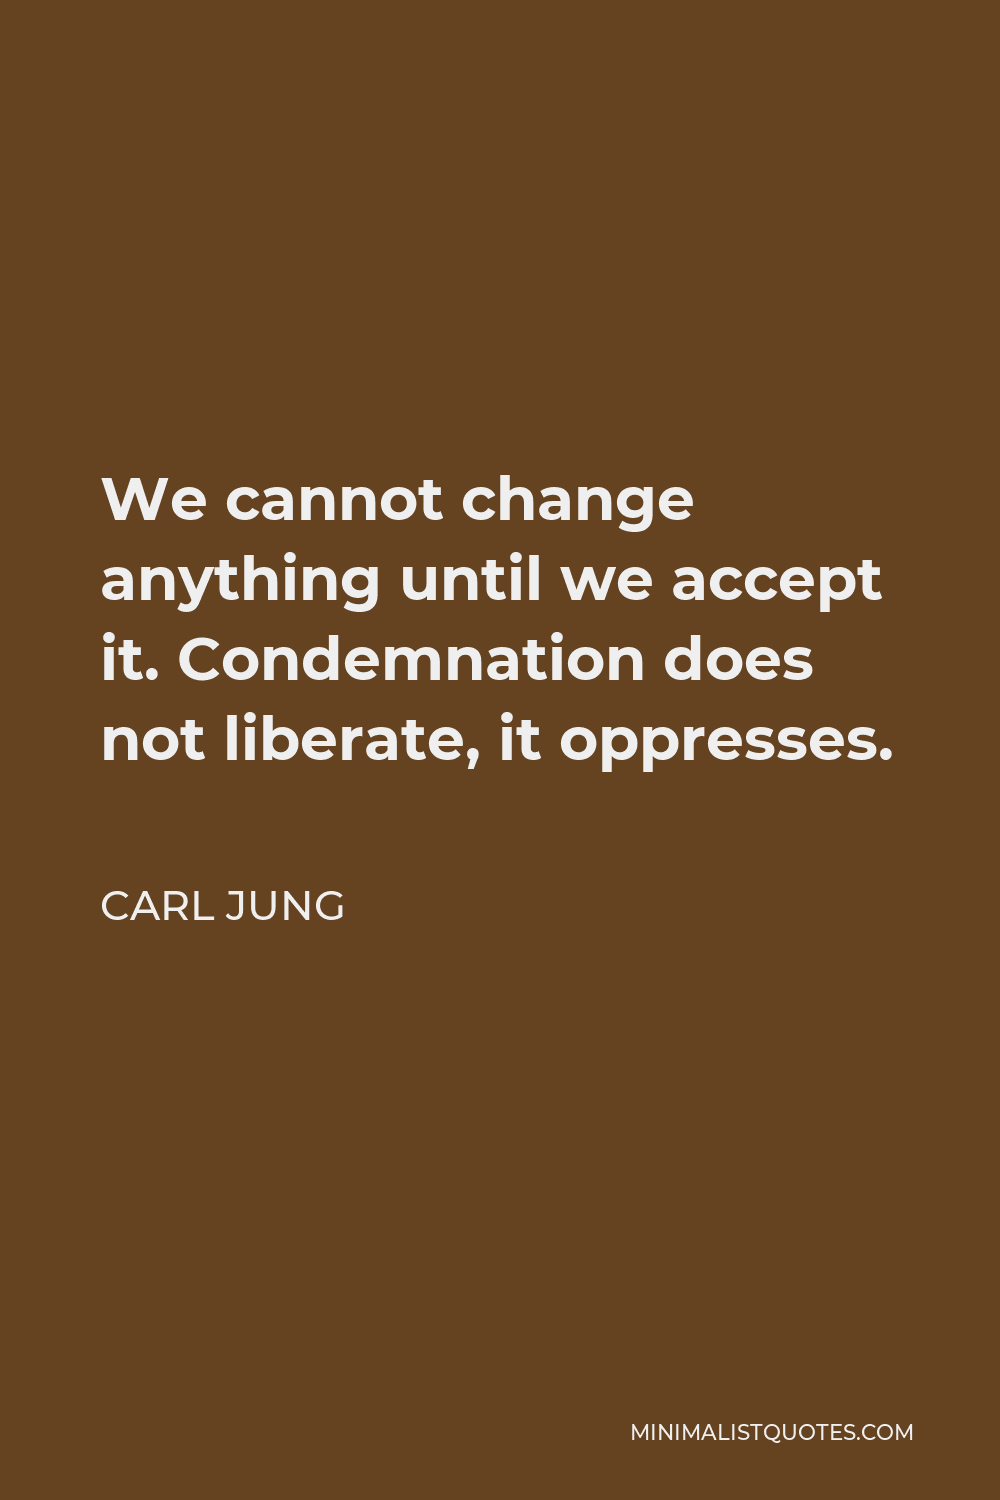 Carl Jung Quote - We cannot change anything until we accept it. Condemnation does not liberate, it oppresses.